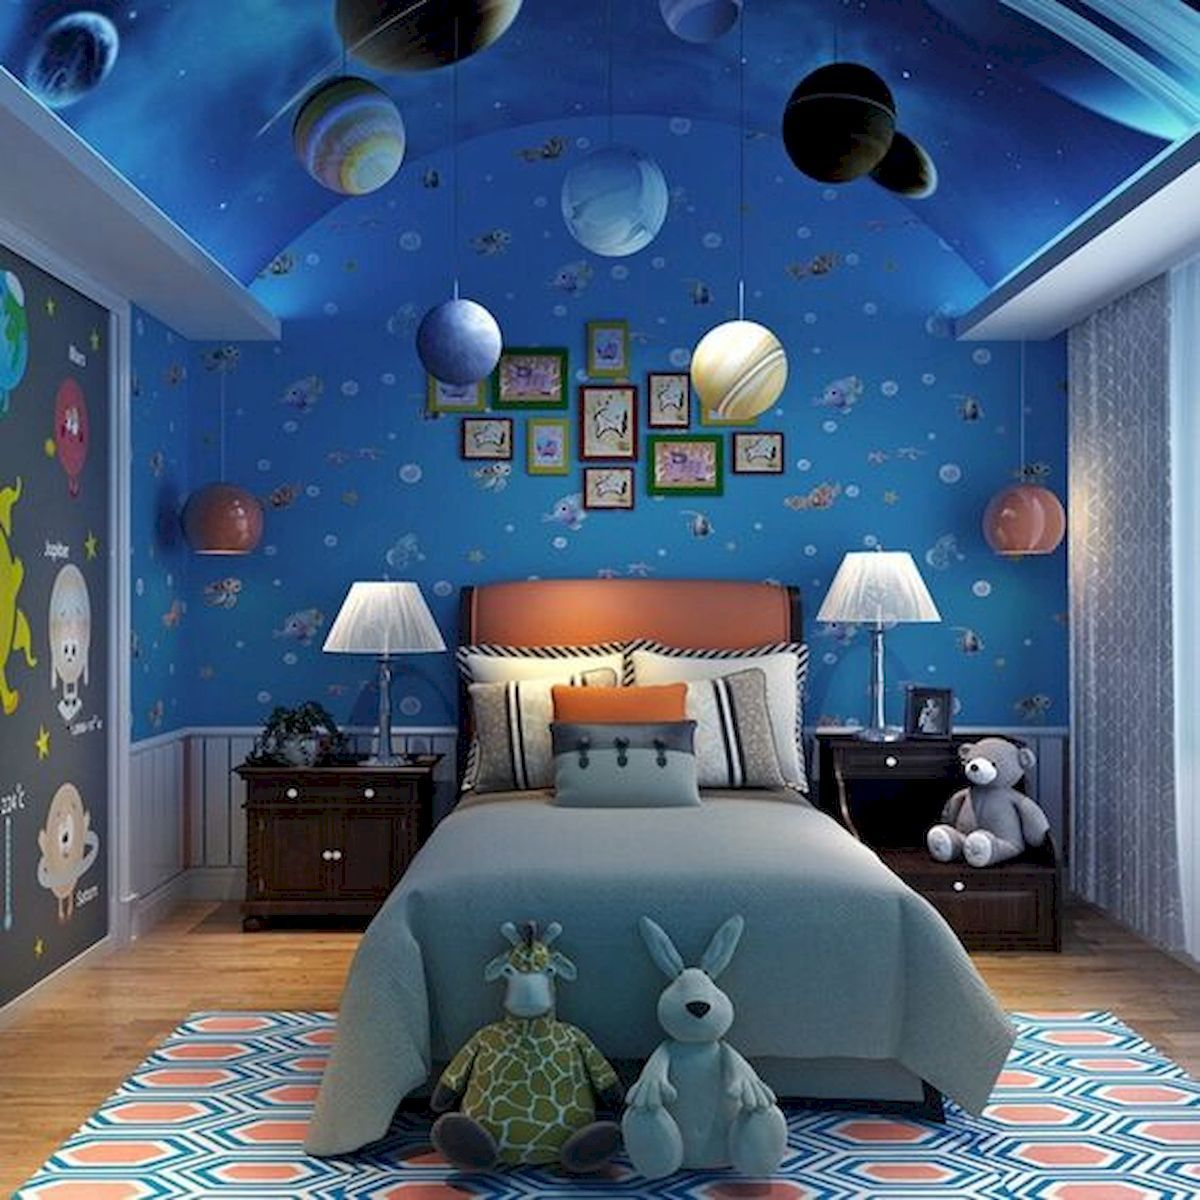 Whimsical and Playful Bedroom Themes for Kids